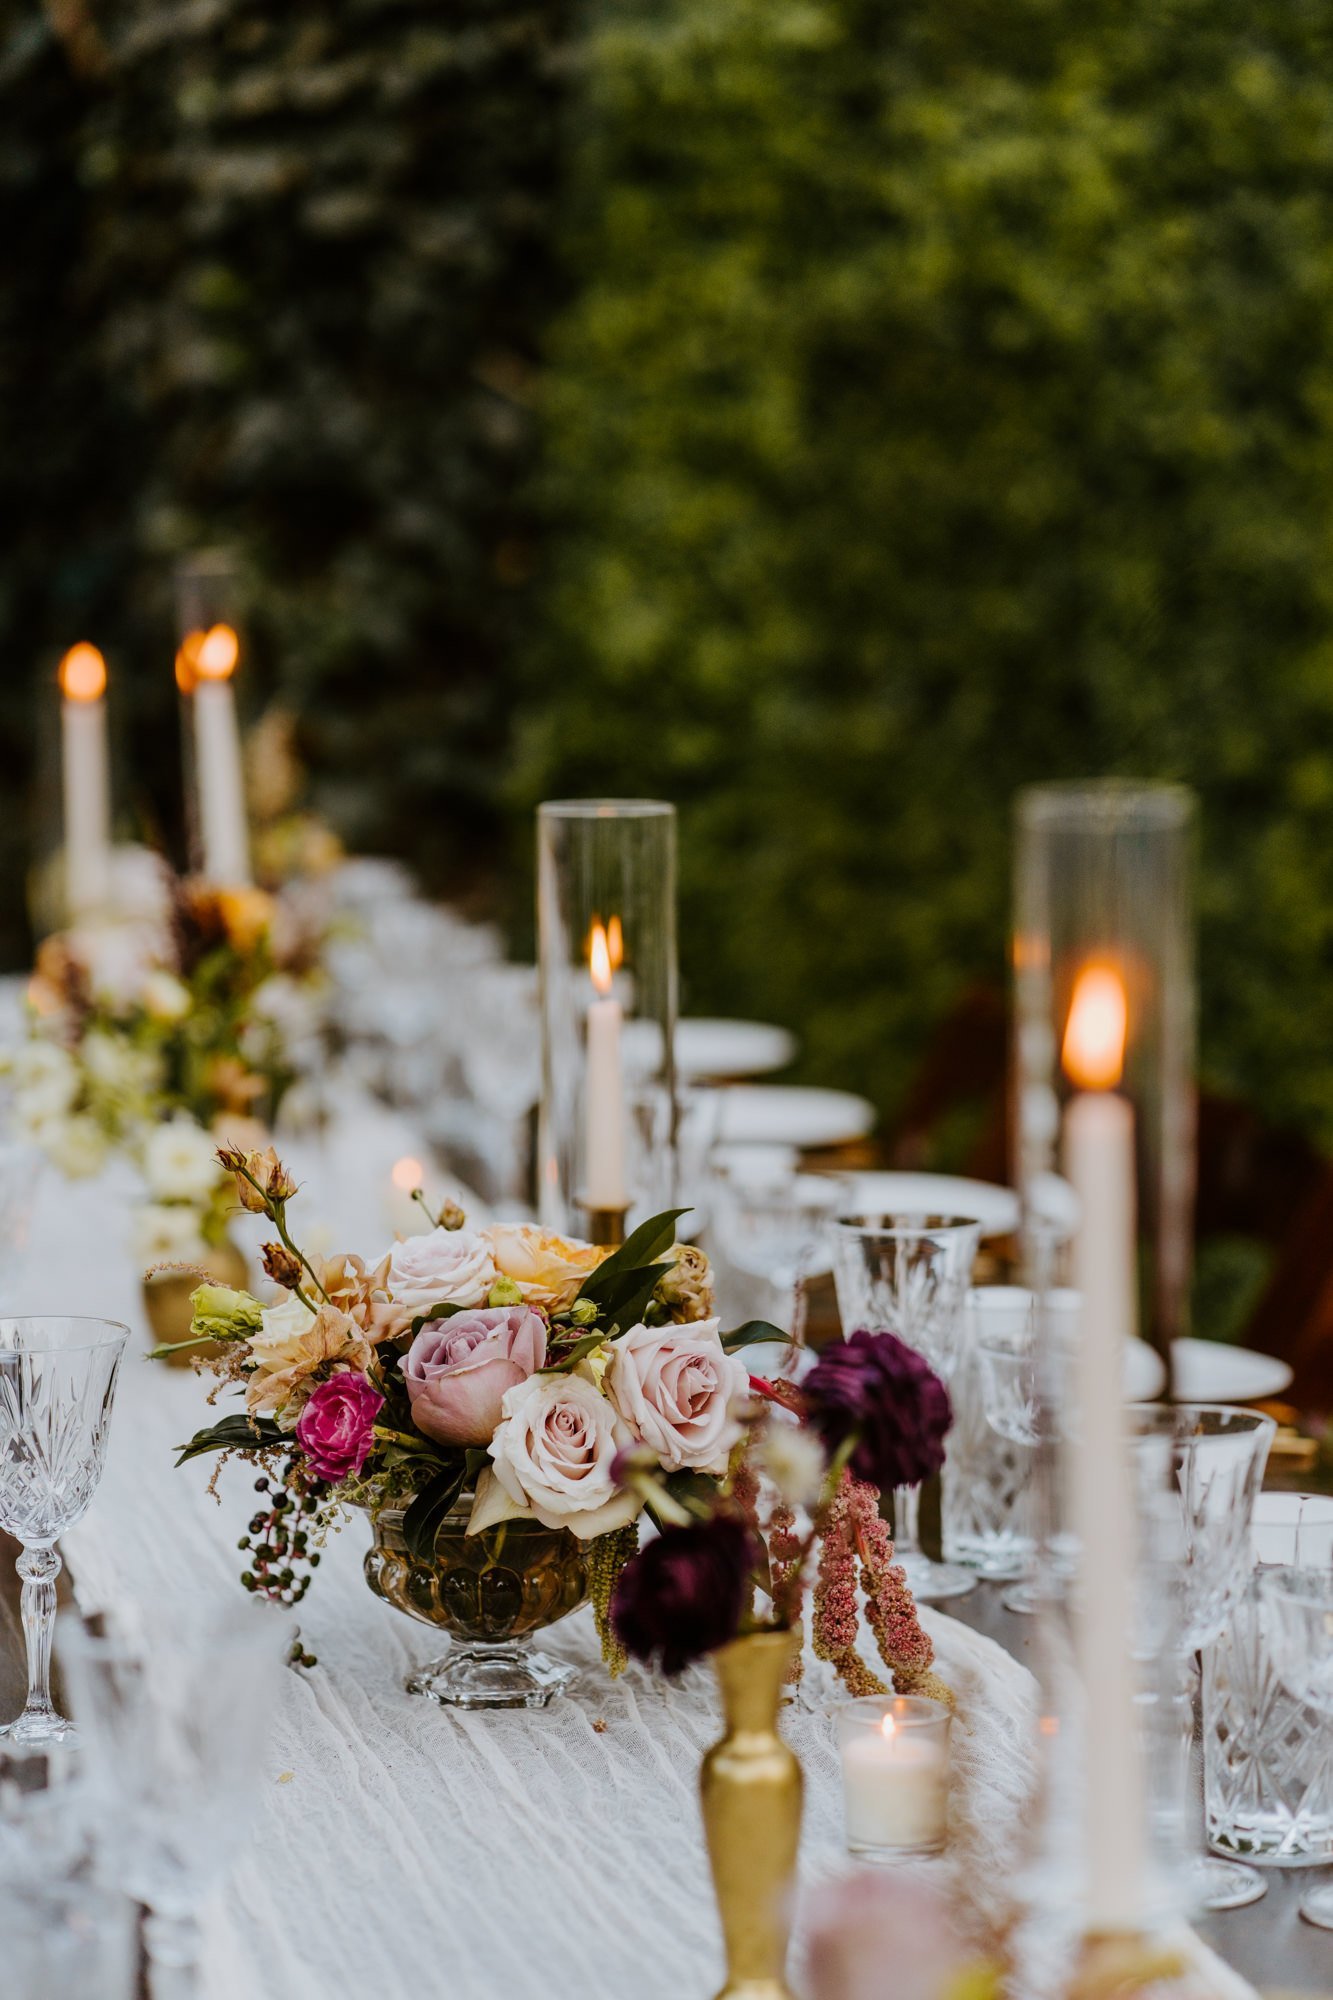 Whimsical romantic wedding reception details at The Houdini Estate wedding in Los Angeles, wedding photography by Tida Svy